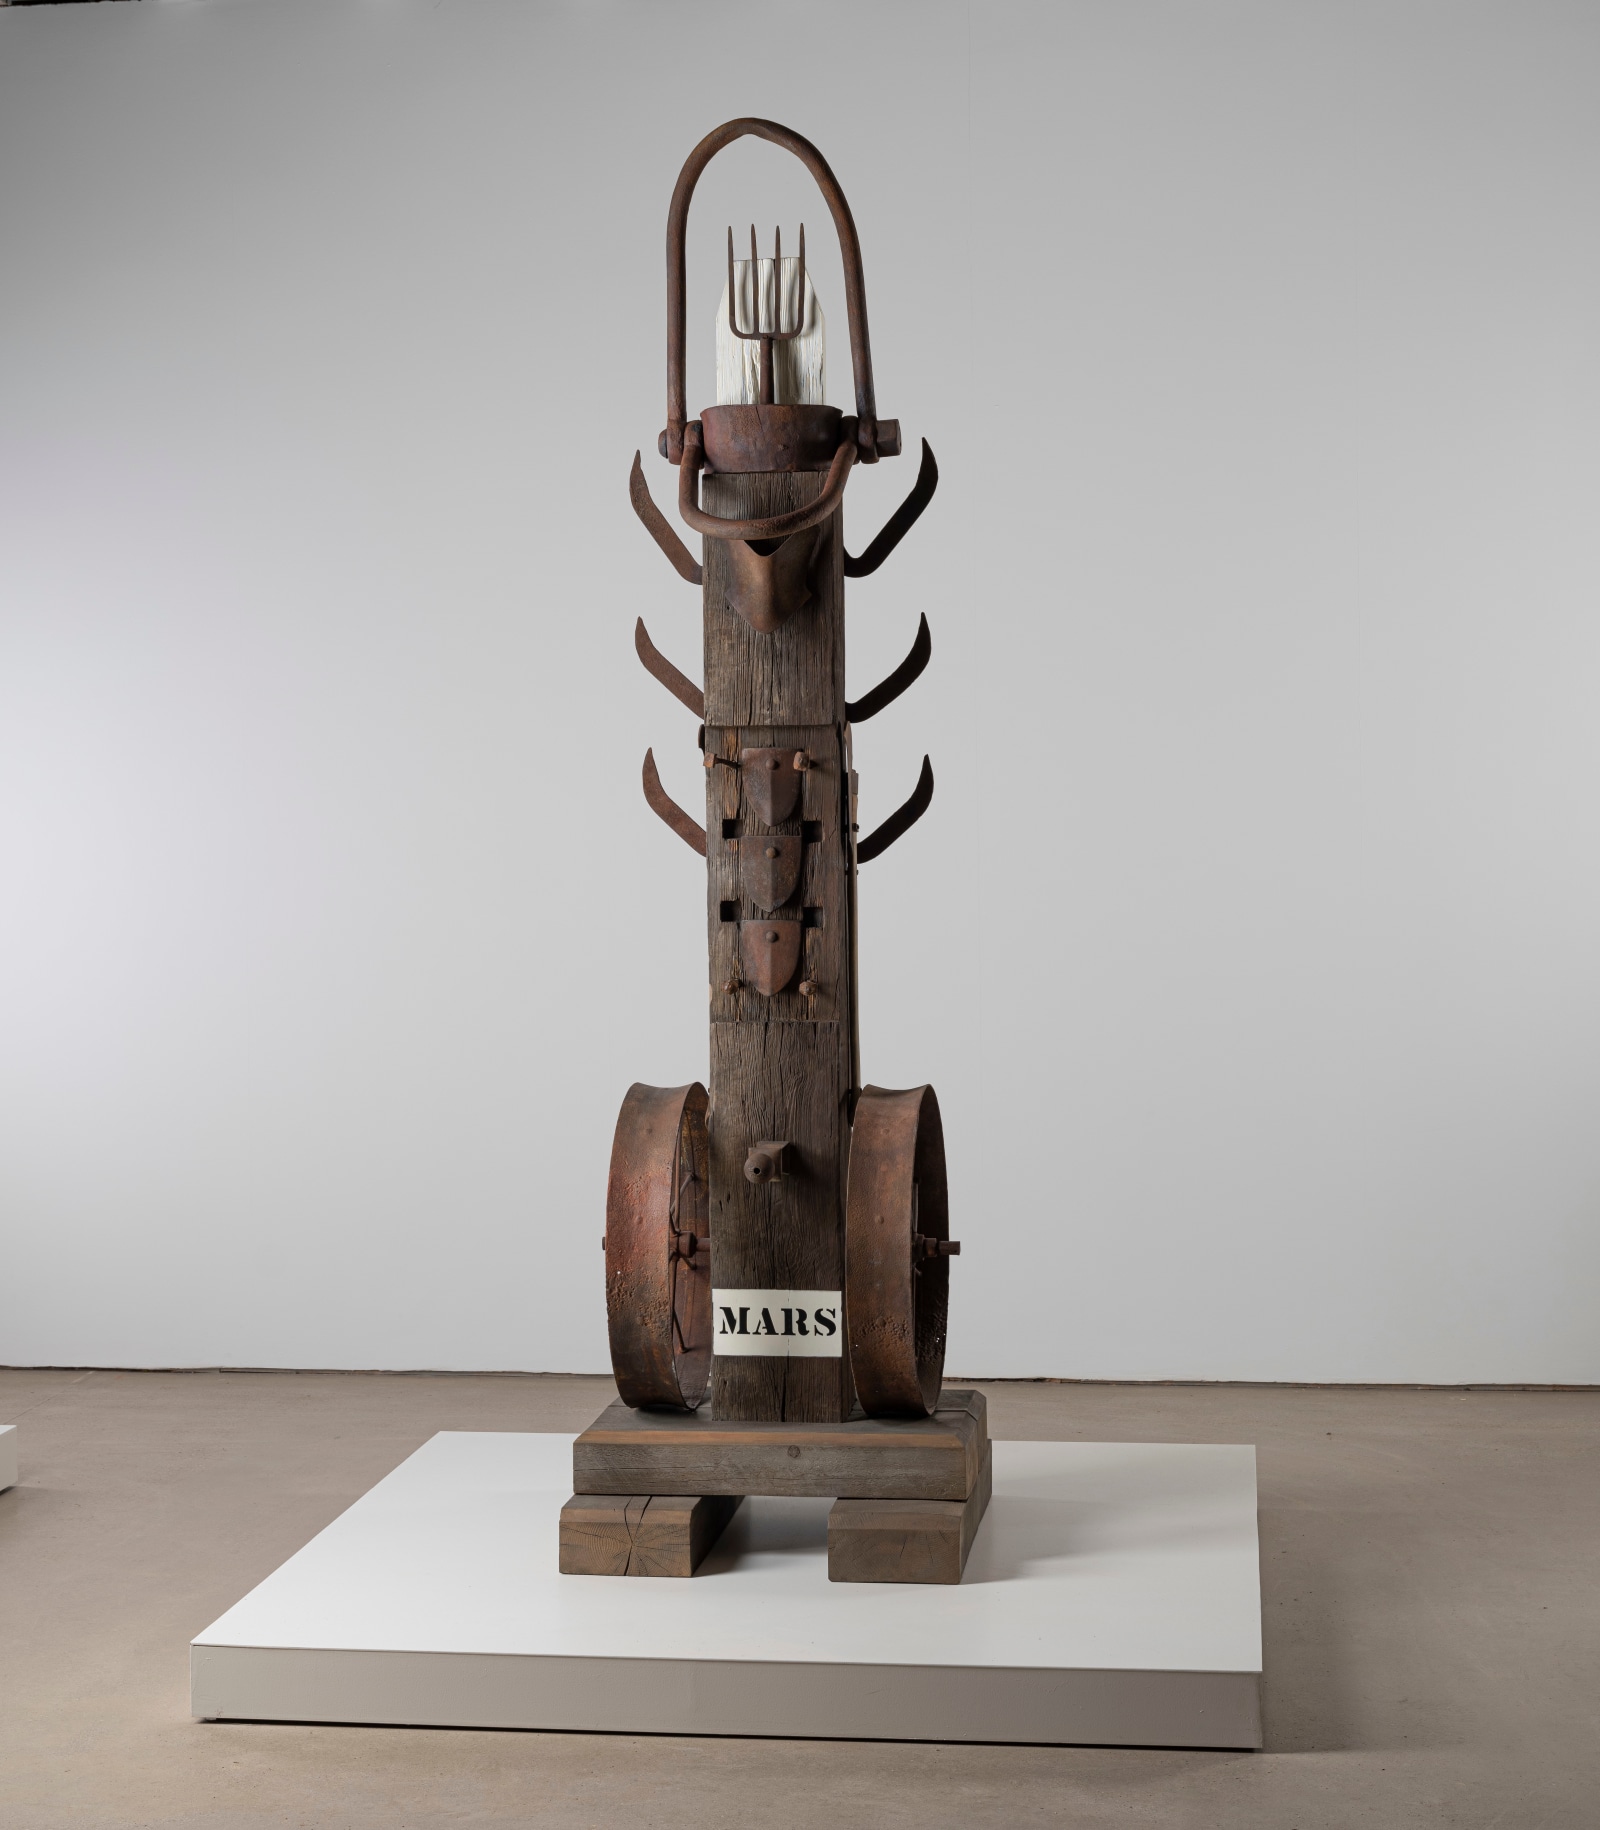 A 131 5/8 by 35 7/8 by 35 7/8 inch painted bronze sculpture consisting of a beam atop a base. The work's title, &quot;Mars,&quot; appears in stenciled letters against a white ground across the front bottom of the sculpture. A wheel is affixed to both the bottom right and left sides of the sculpture. Three brush axes have been affixed to both the upper right and upper left sides of, and a pitchfork has been affixed at the top of the sculpture.